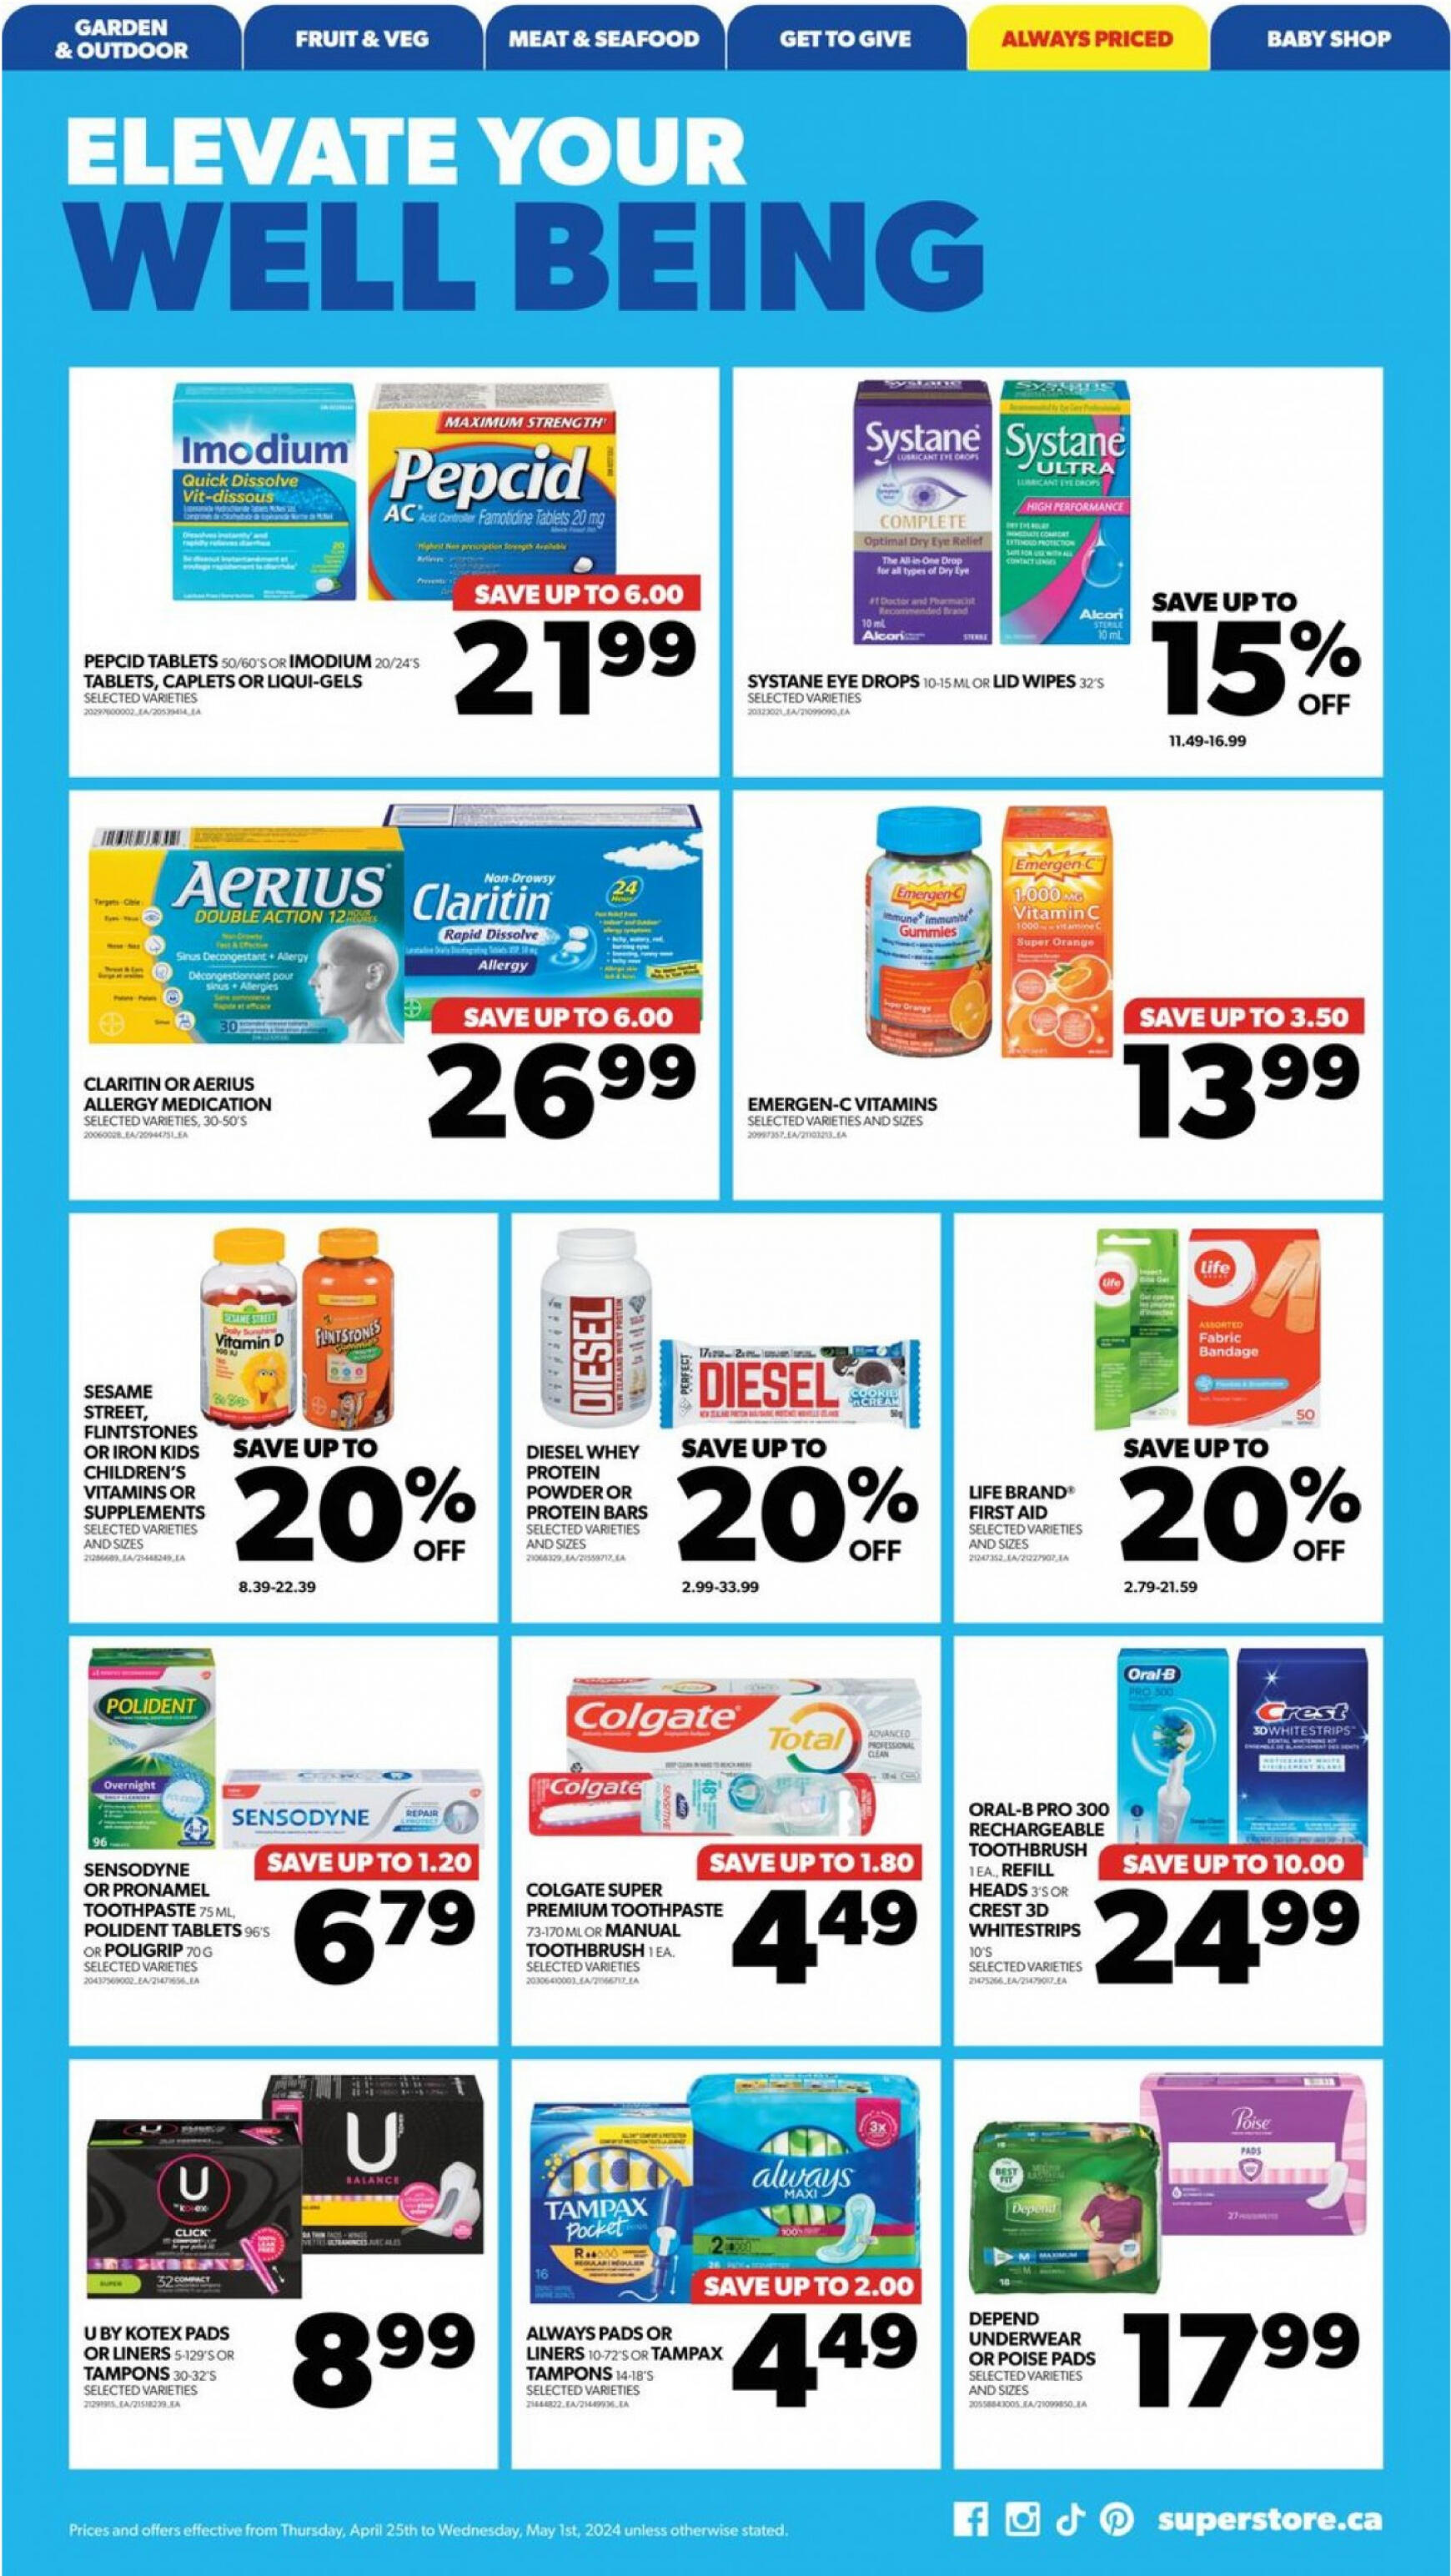 real-canadian-superstore - Real Canadian Superstore flyer current 01.05. - 31.05. - page: 25